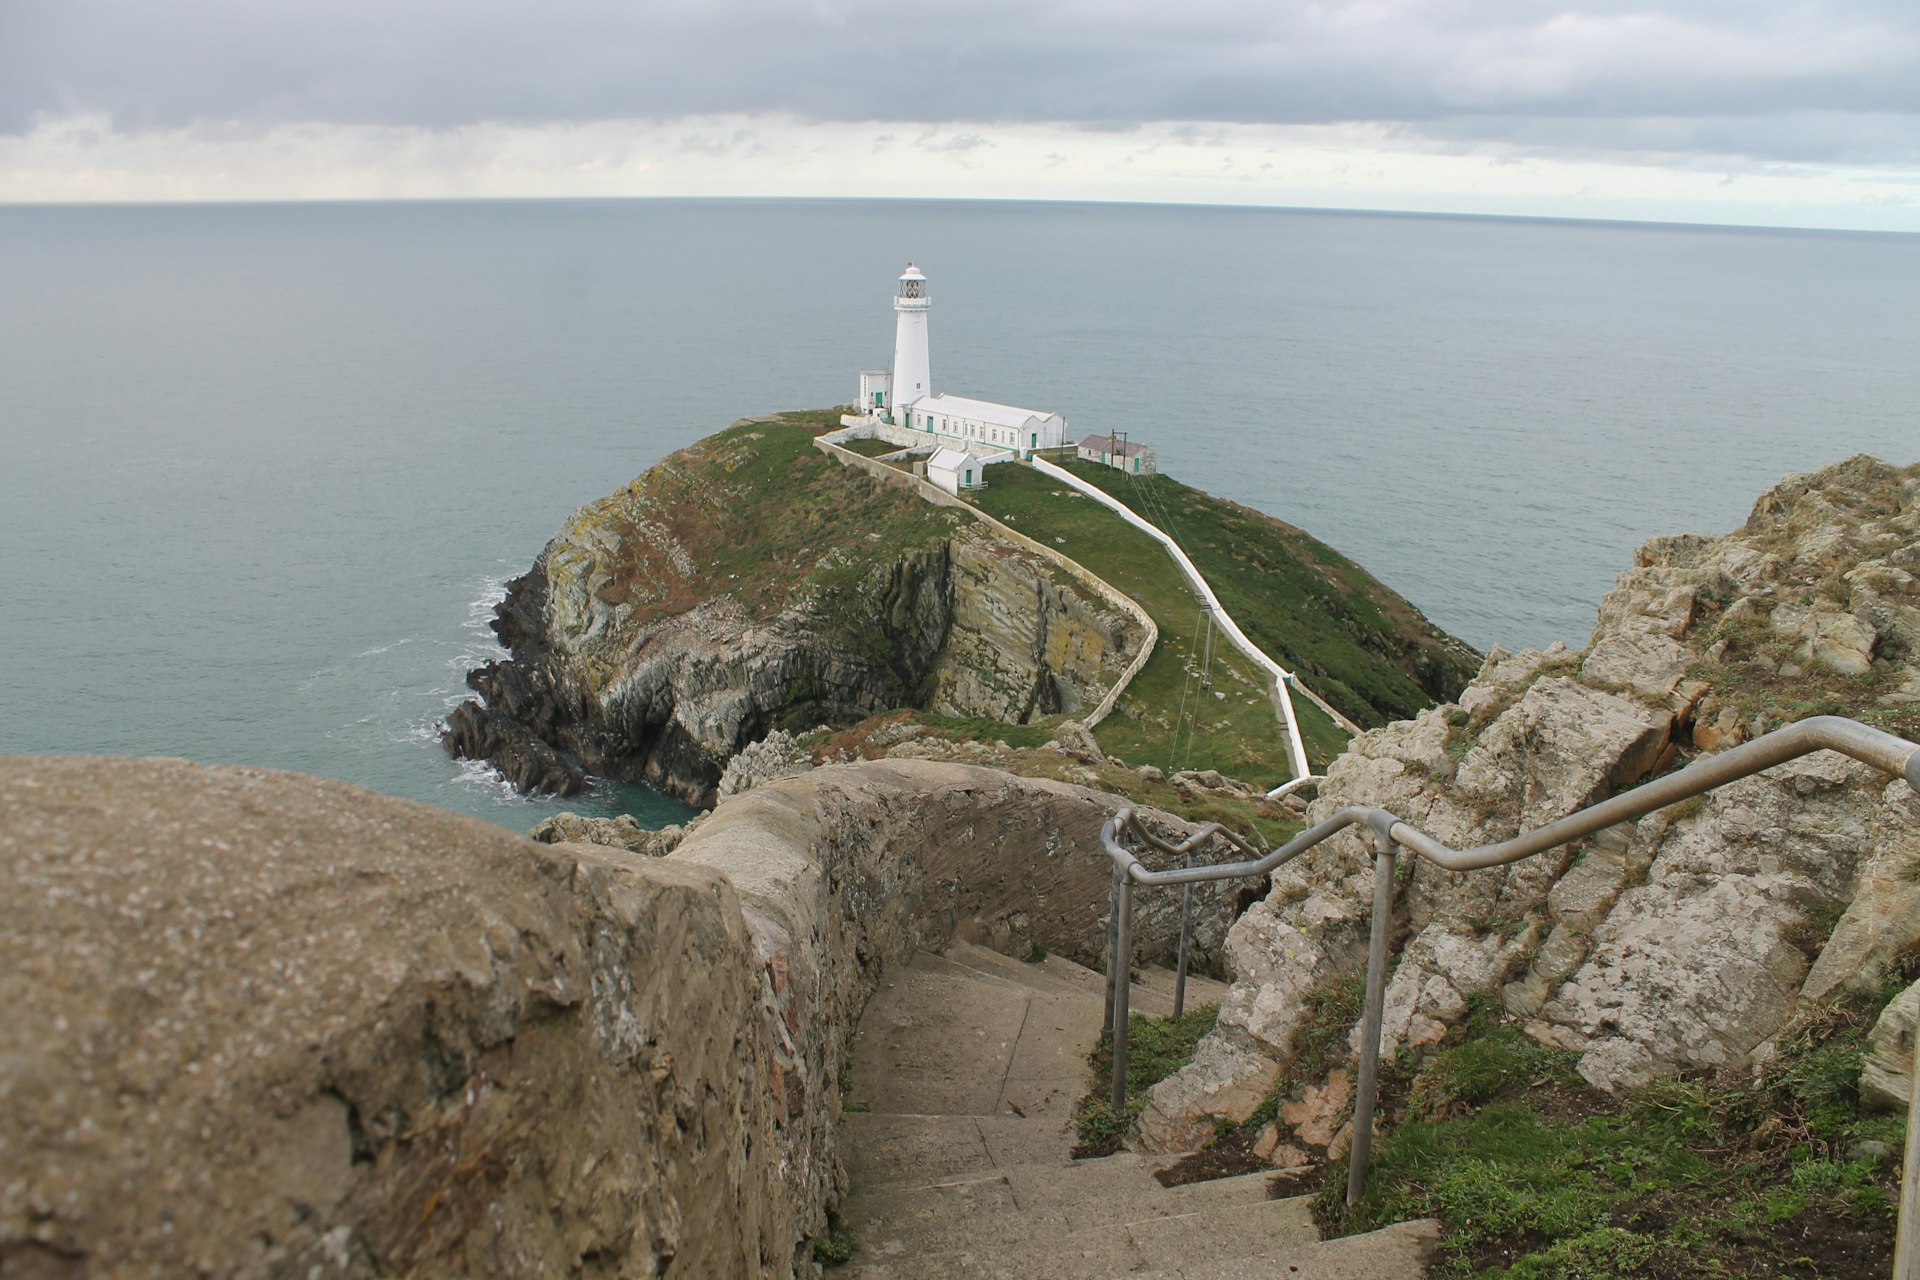 South Stack Lighthouse stands on a small rocky outcrop on the island of Anglesey. It is surrounded by sea and a cloudy sky.